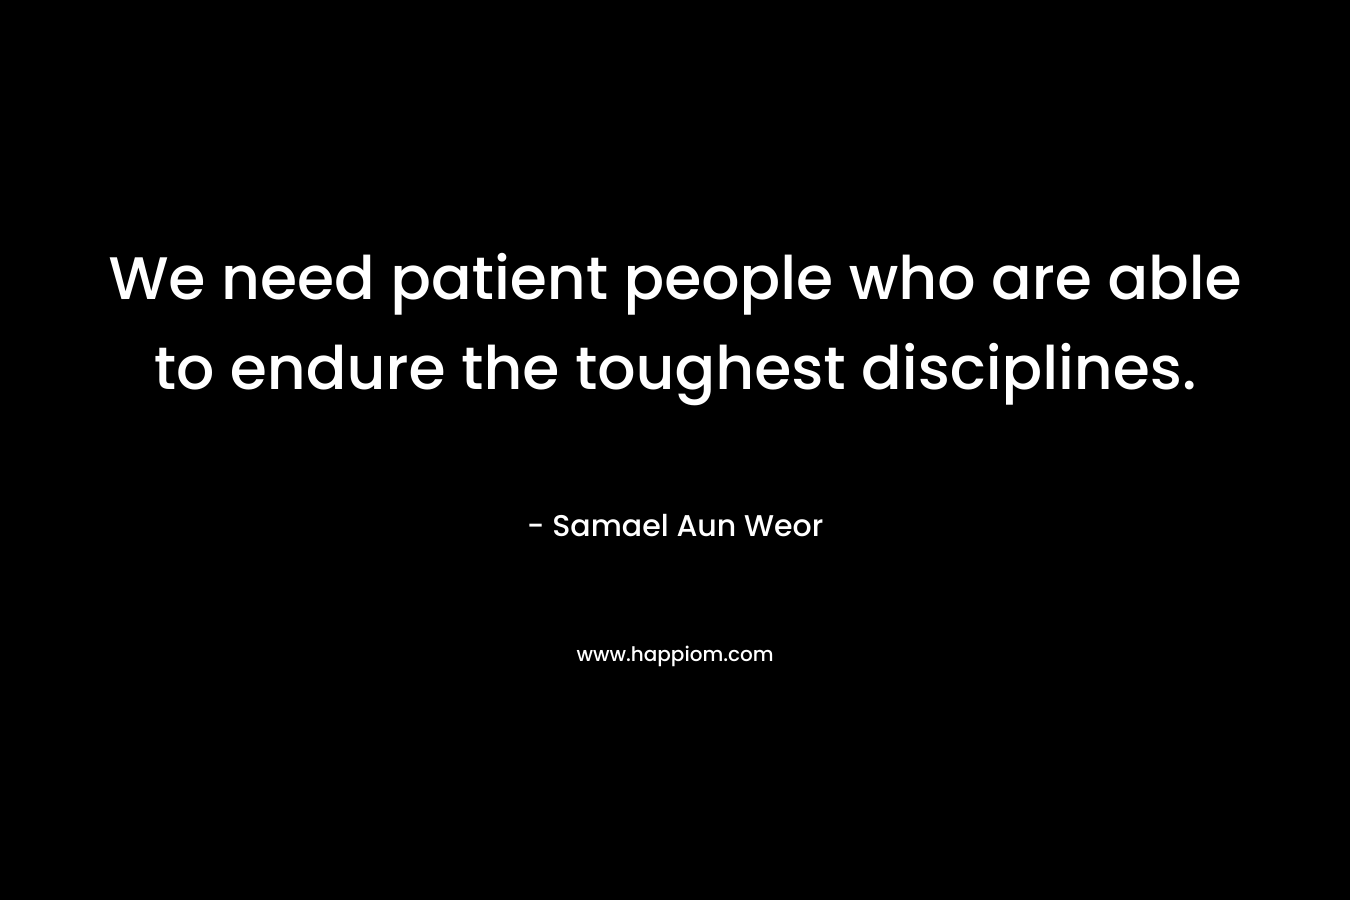 We need patient people who are able to endure the toughest disciplines. – Samael Aun Weor